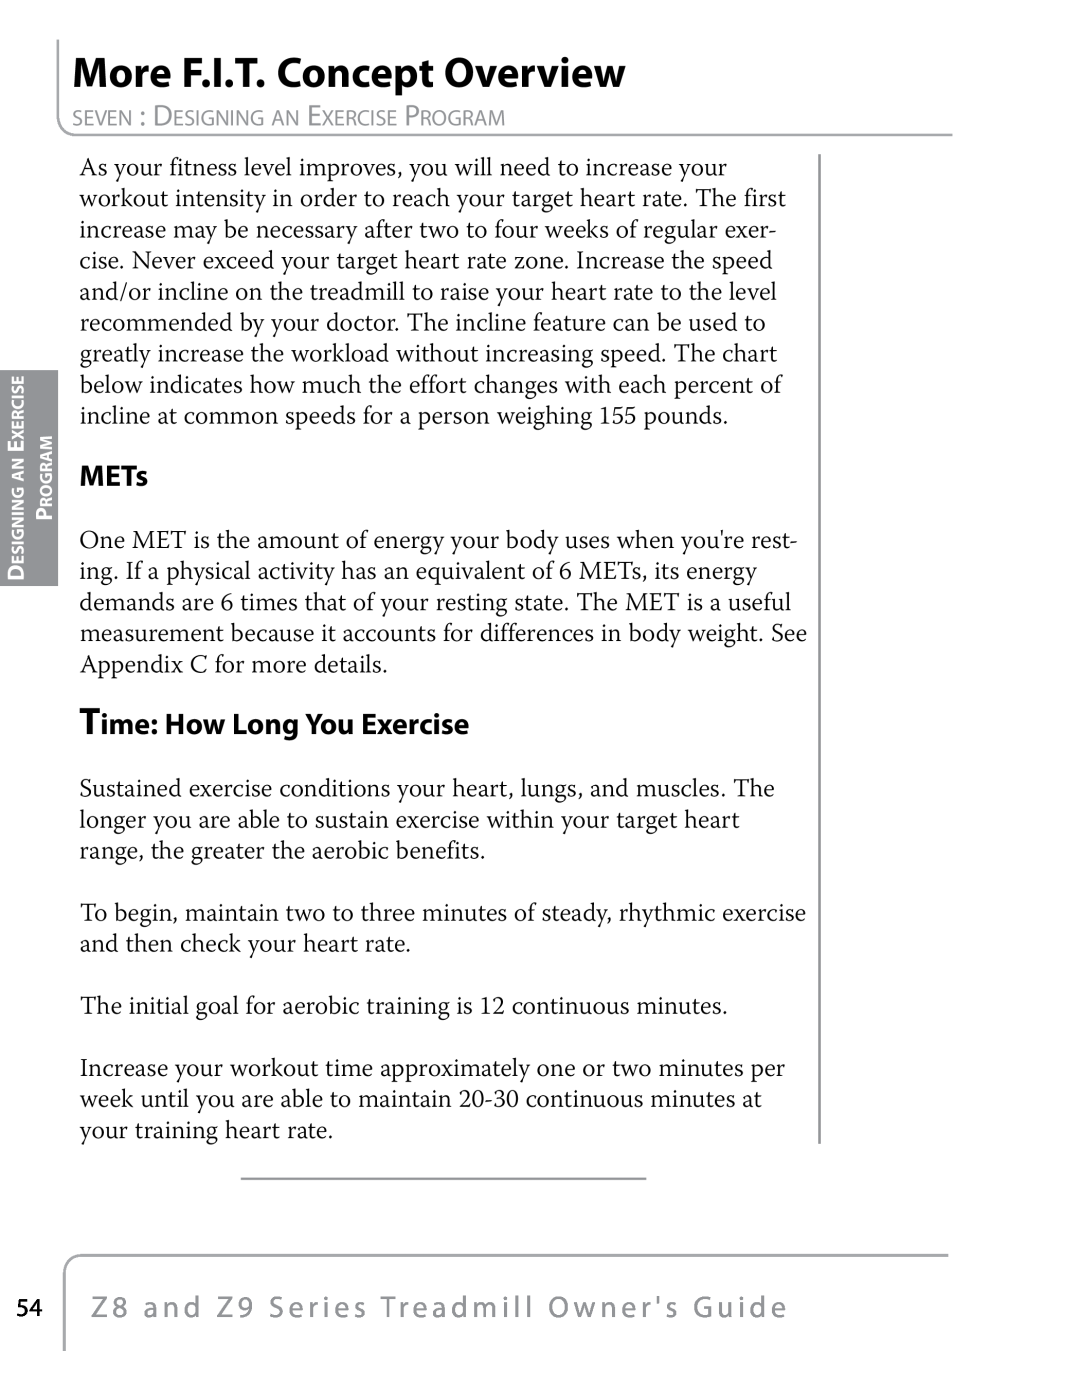 True Fitness Z8, Z9 manual More F.I.T. Concept Overview, METs, Time How Long You Exercise 